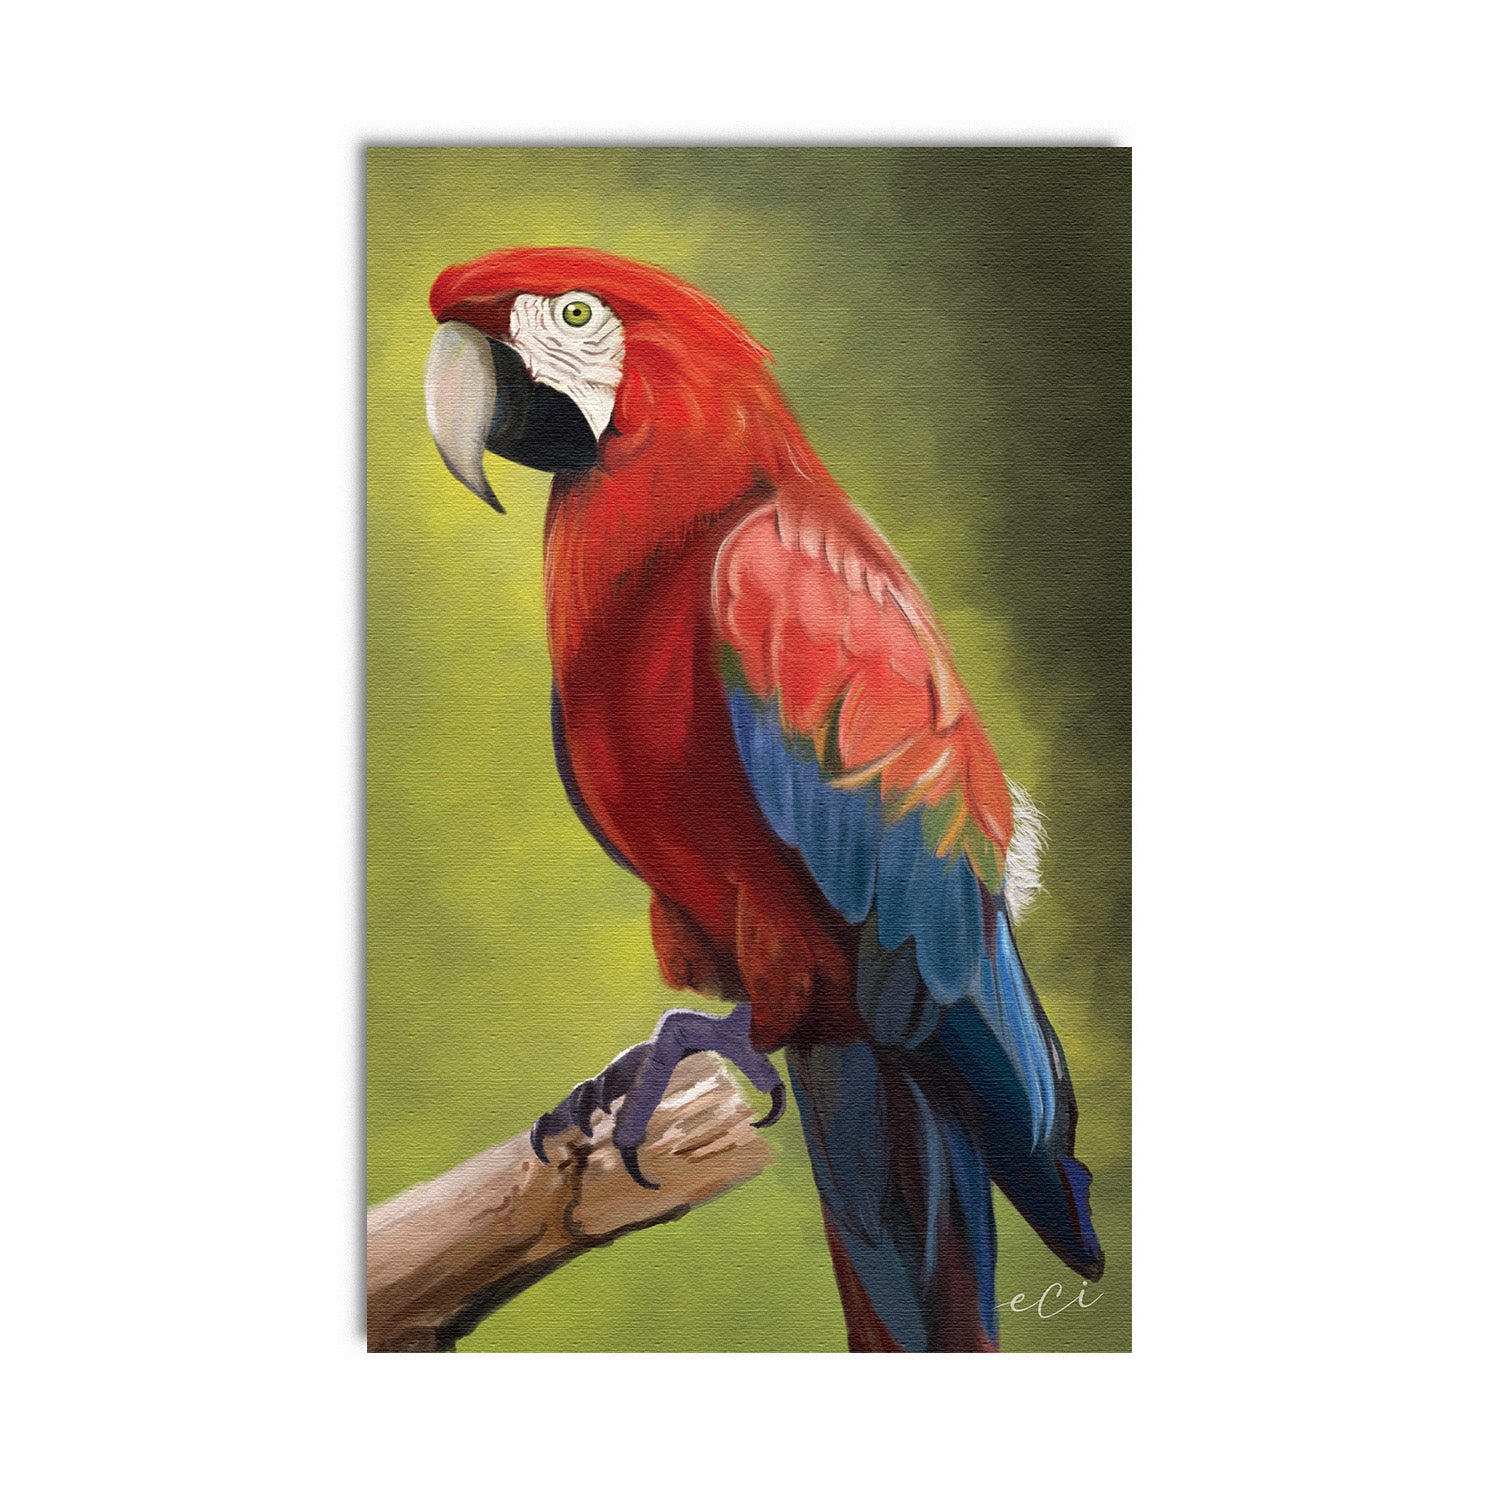 Parrot On Tree Branch Canvas Painting Digital Printed Bird Wall Art 2